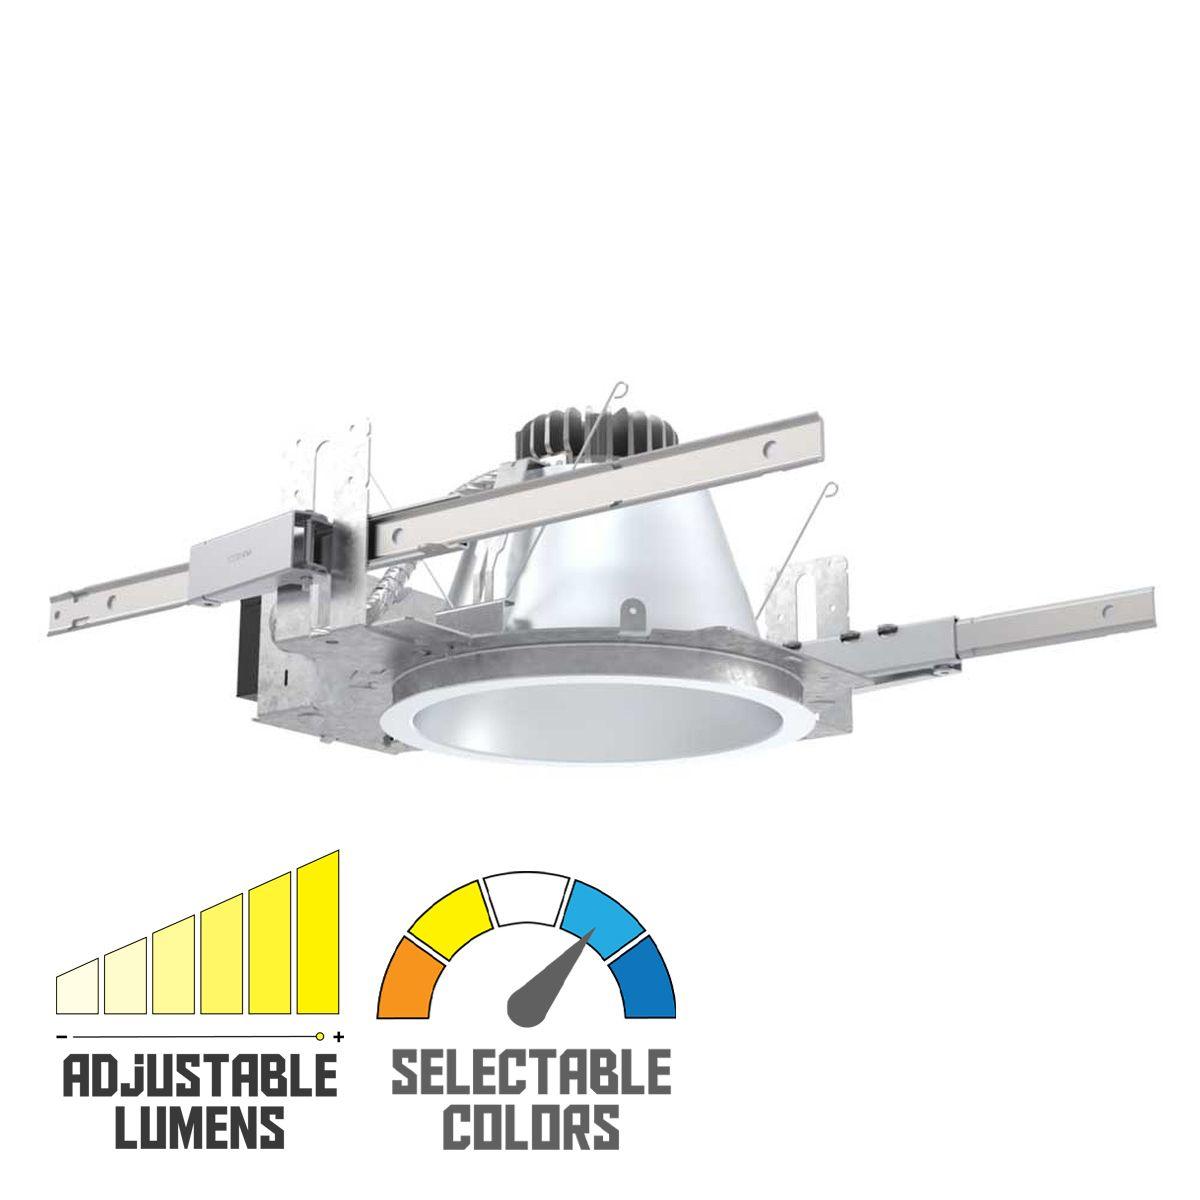 Lithonia LDN8 Commercial LED Recessed Downlight, 3800 Lumens Adjustable, Selectable CCT, 30K/35K/40K/50K (Reflector Sold Separately) - Bees Lighting